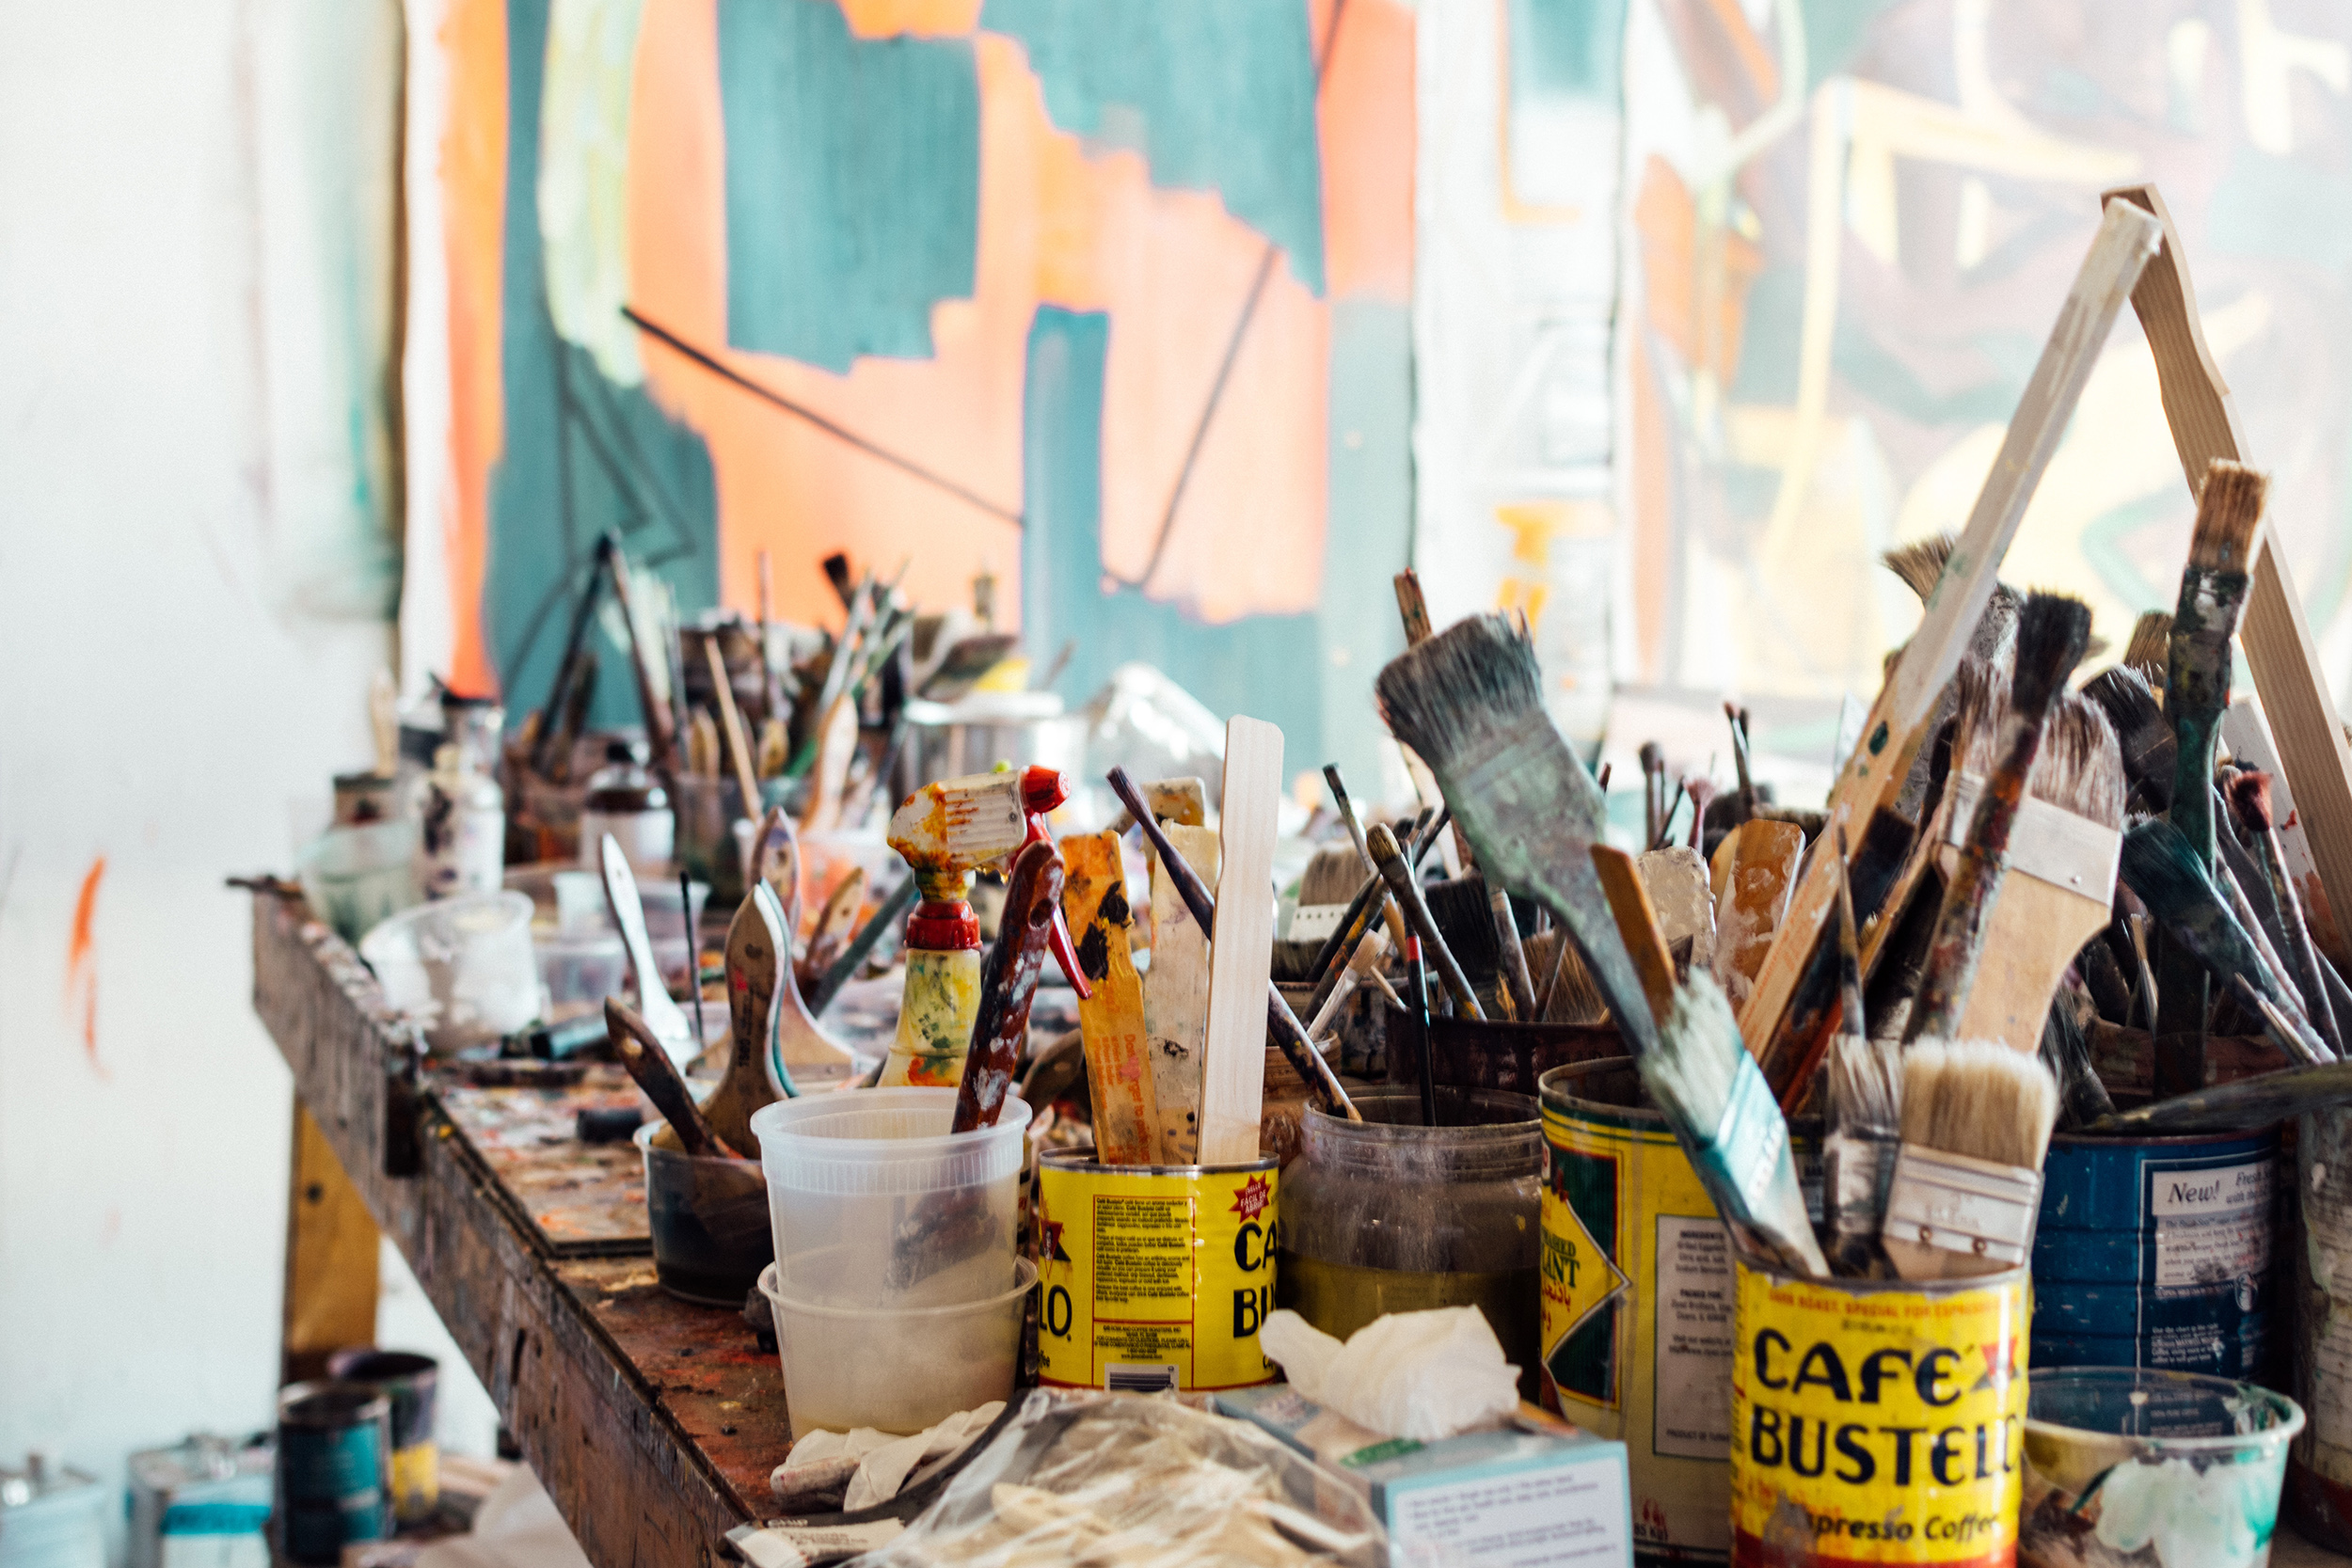  Brushes and studio materials are supplied in our art workshops. Join us for an artist travel adventure to Spain, Morocco, California wine country, Germany, Italy or France! 